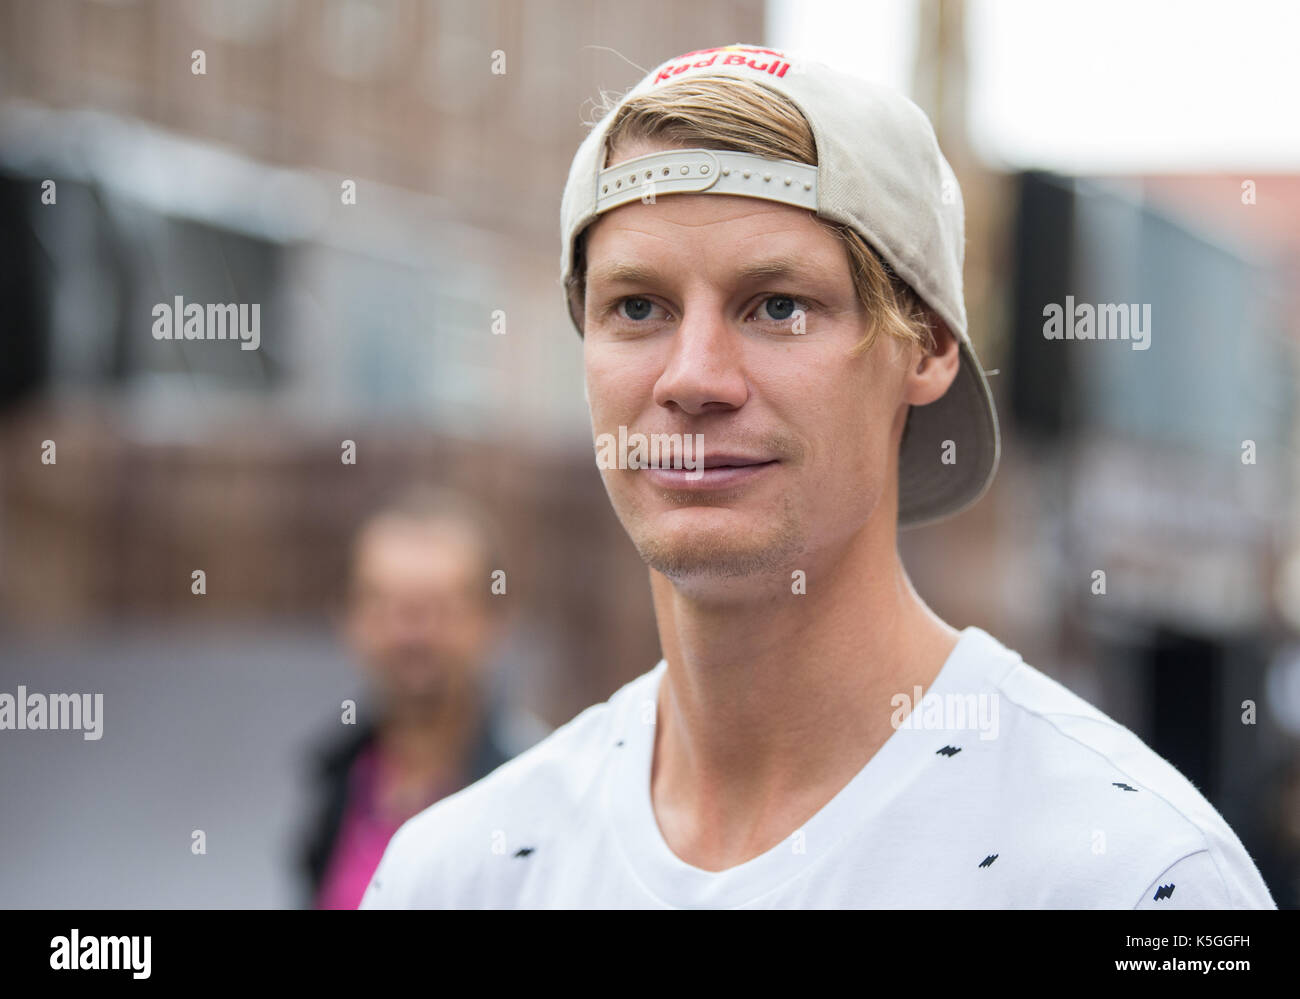 Nuremberg, Germany. 2nd Sep, 2017. The Swedish professional mountain biker Martin Söderström talks to journalists at the Red Bill District Ride event in Nuremberg, Germany, 2 September 2017. Martin Söderström designed a track in the centre of the city upon which bikers can demonstrate their skills. The event was previously held in 2005, 2006, 2011 and 2014. Photo: Silas Stein/dpa/Alamy Live News Stock Photo